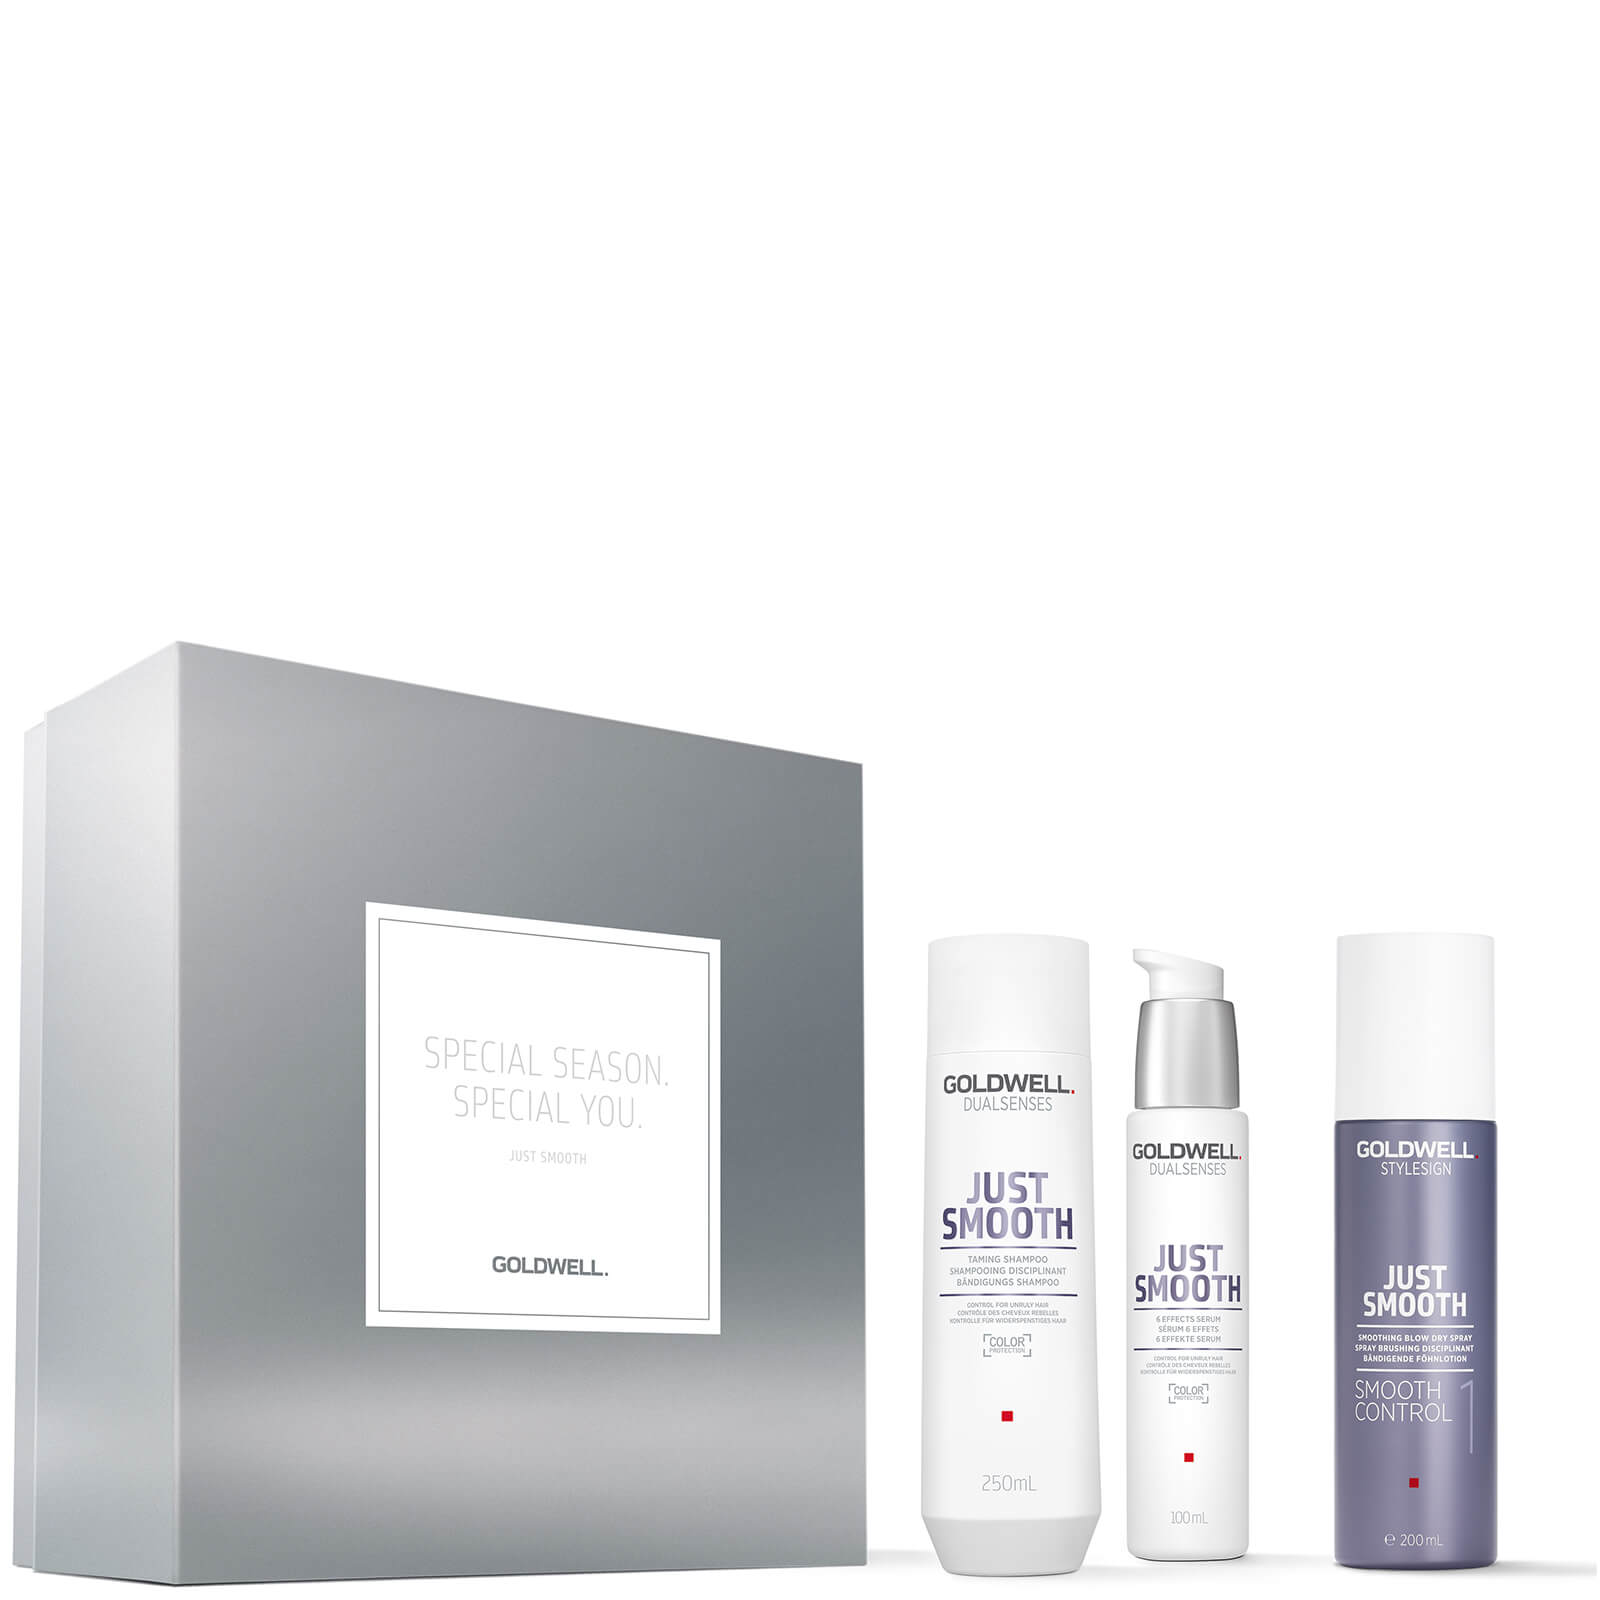 Goldwell Just Smooth Gift Set